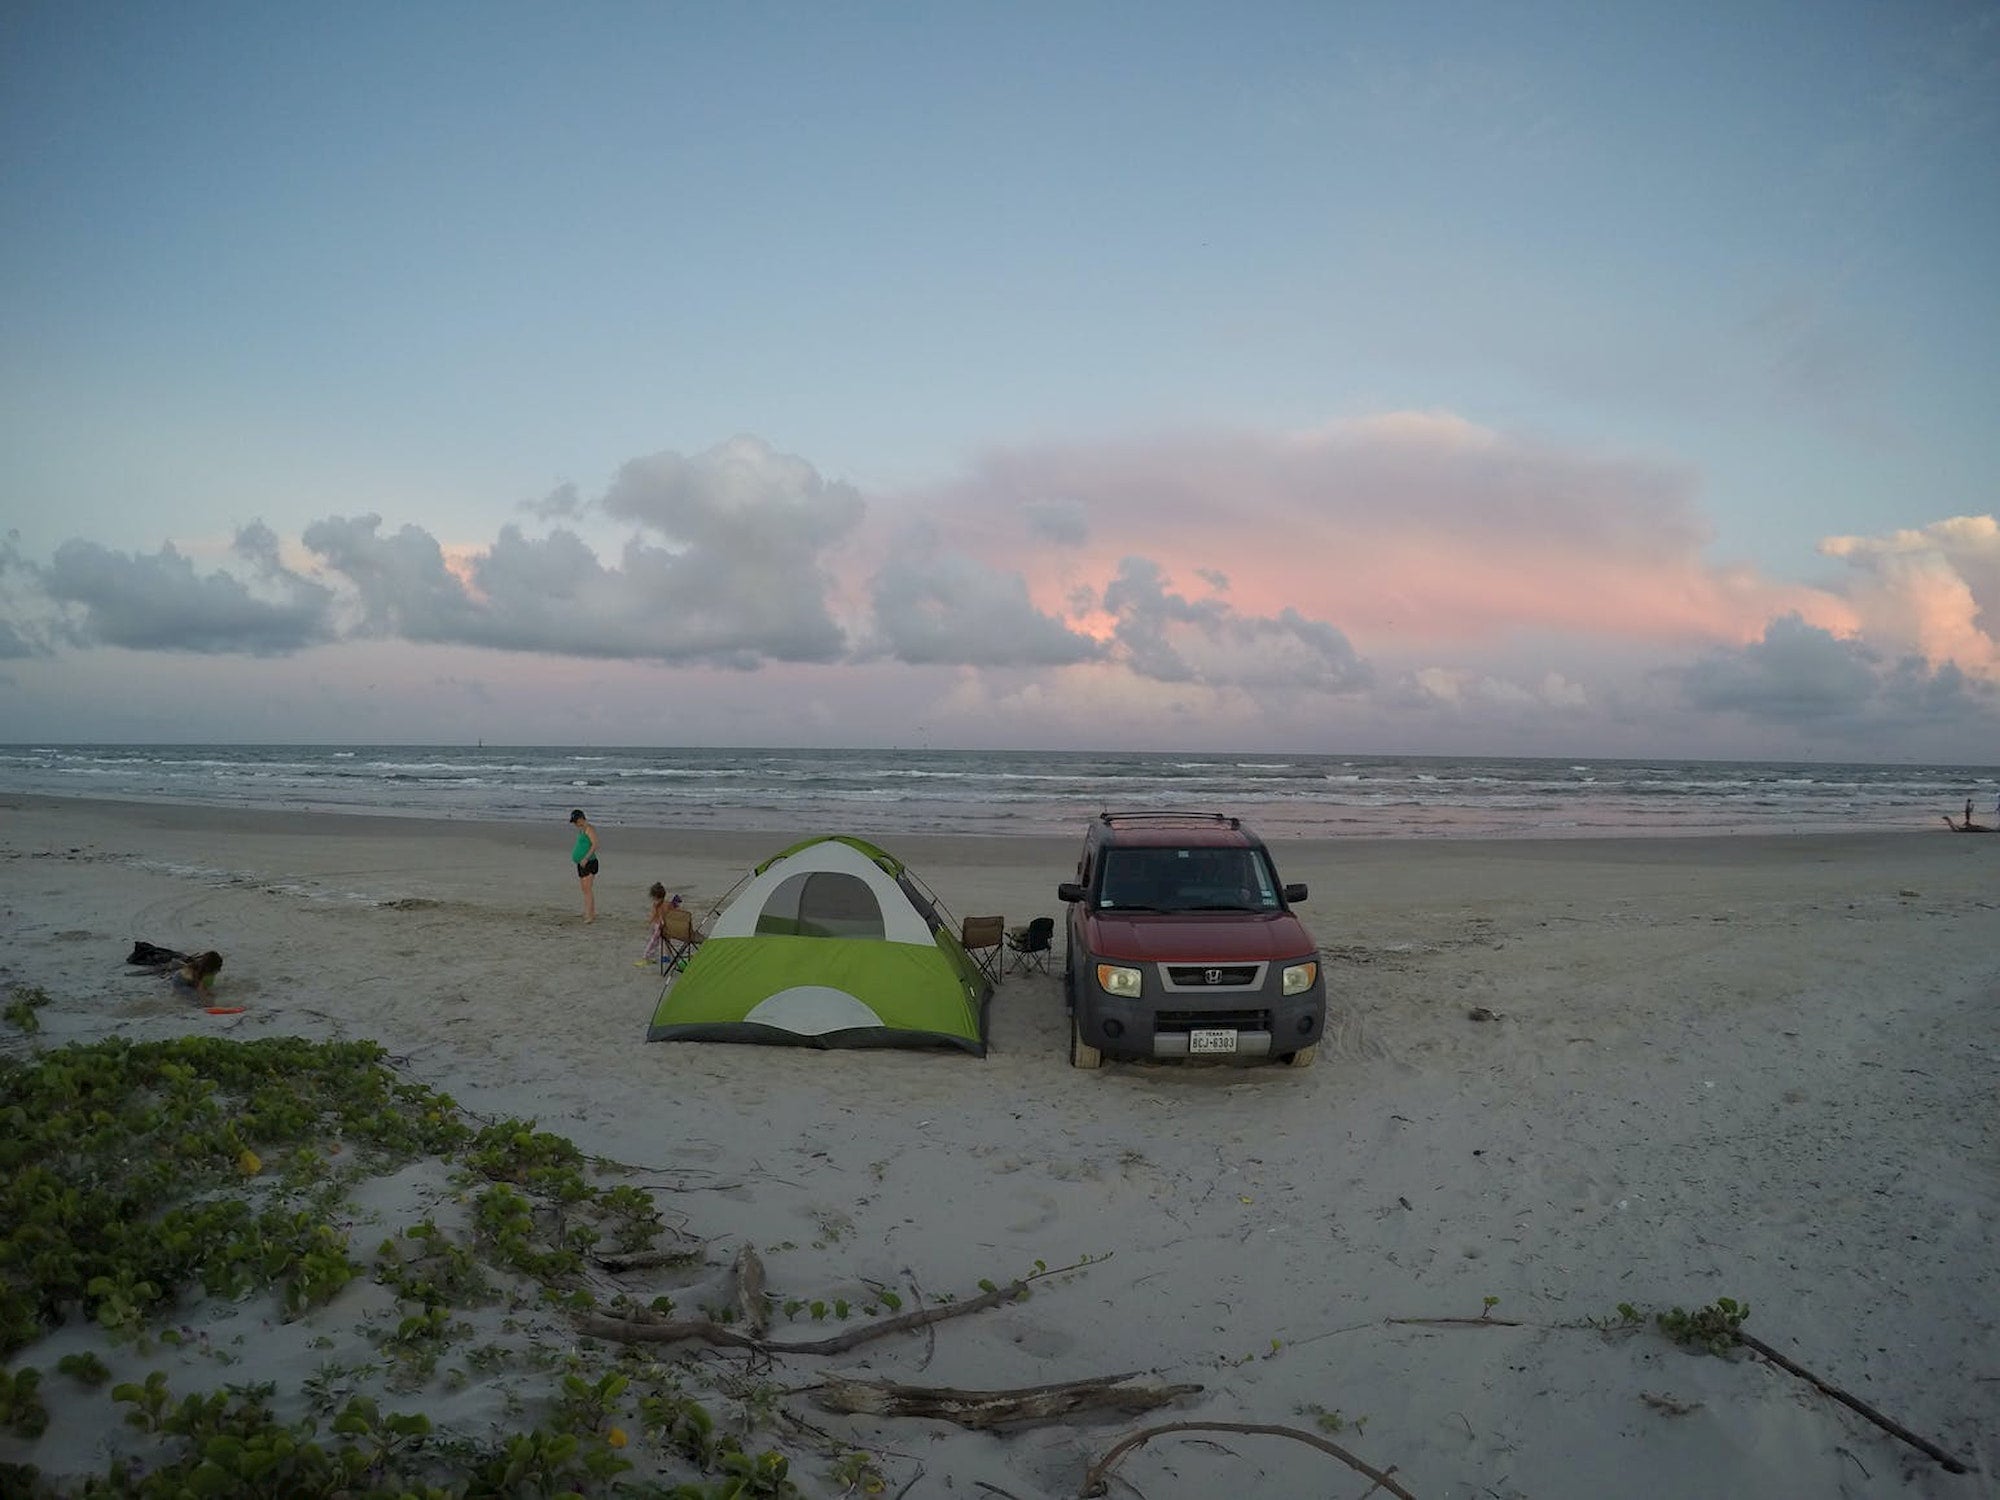 Tent set up beside car on the beach at sunset.